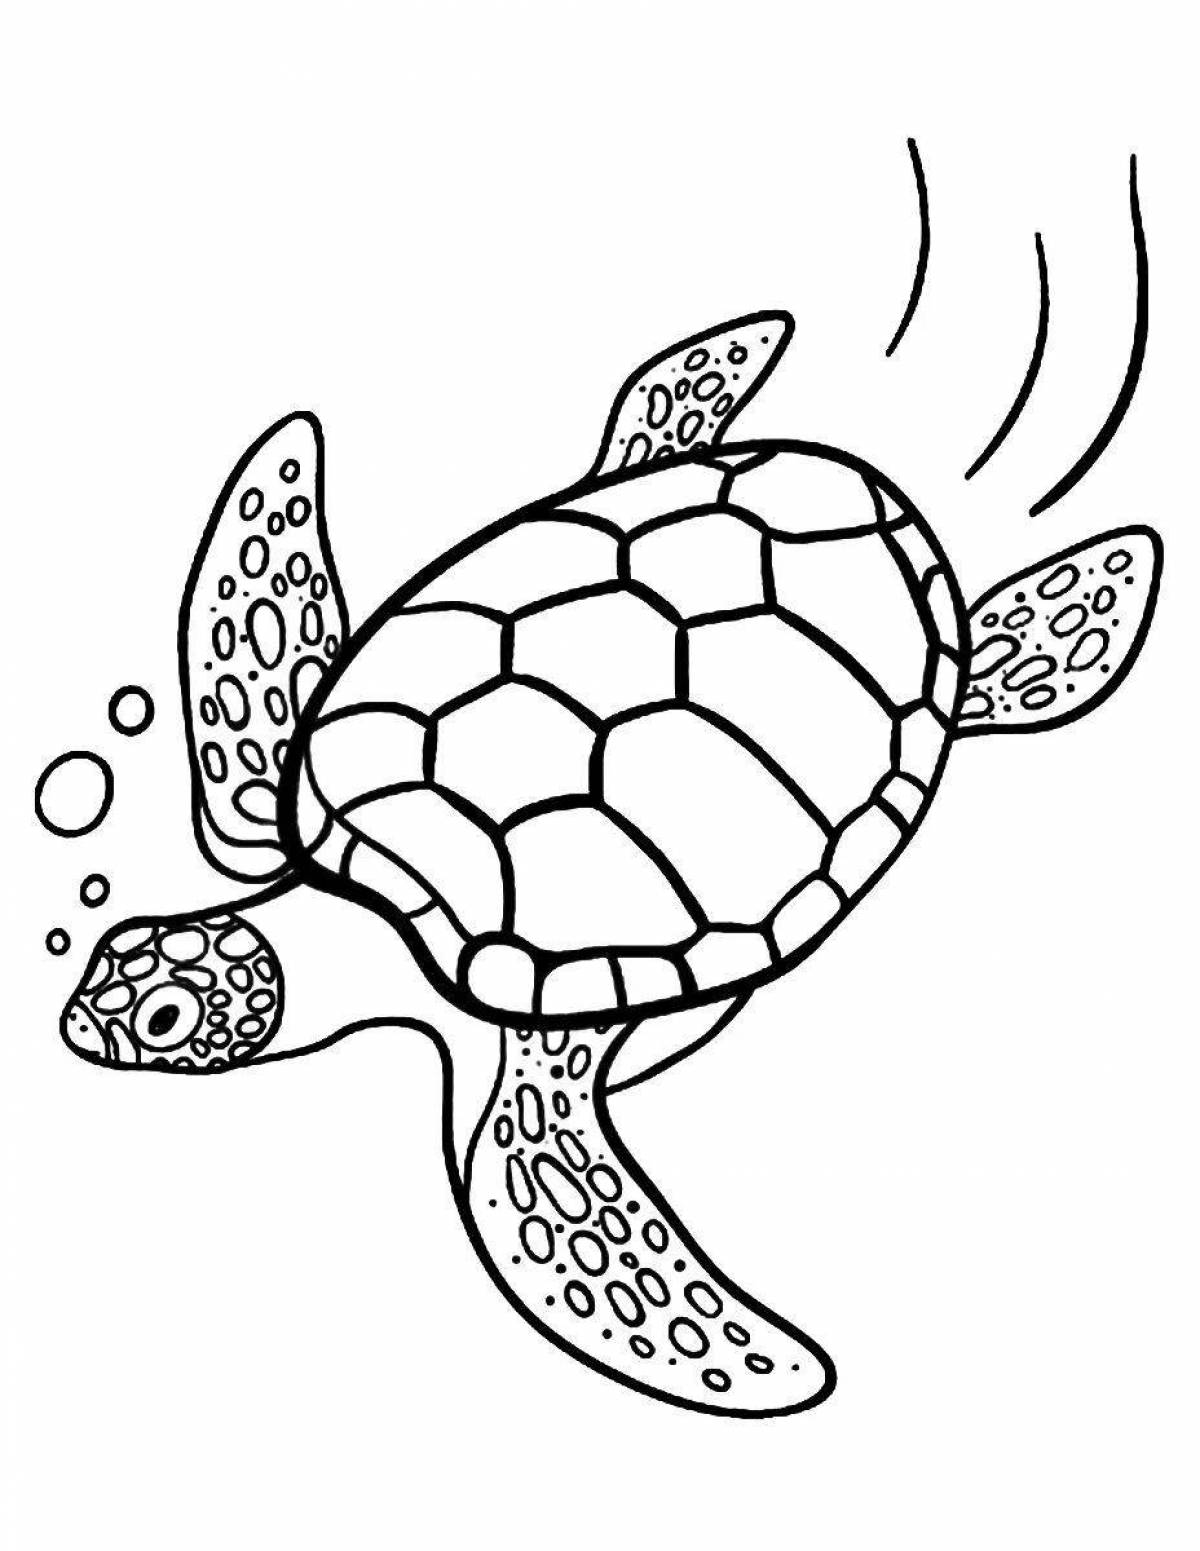 Blooming turtle coloring page